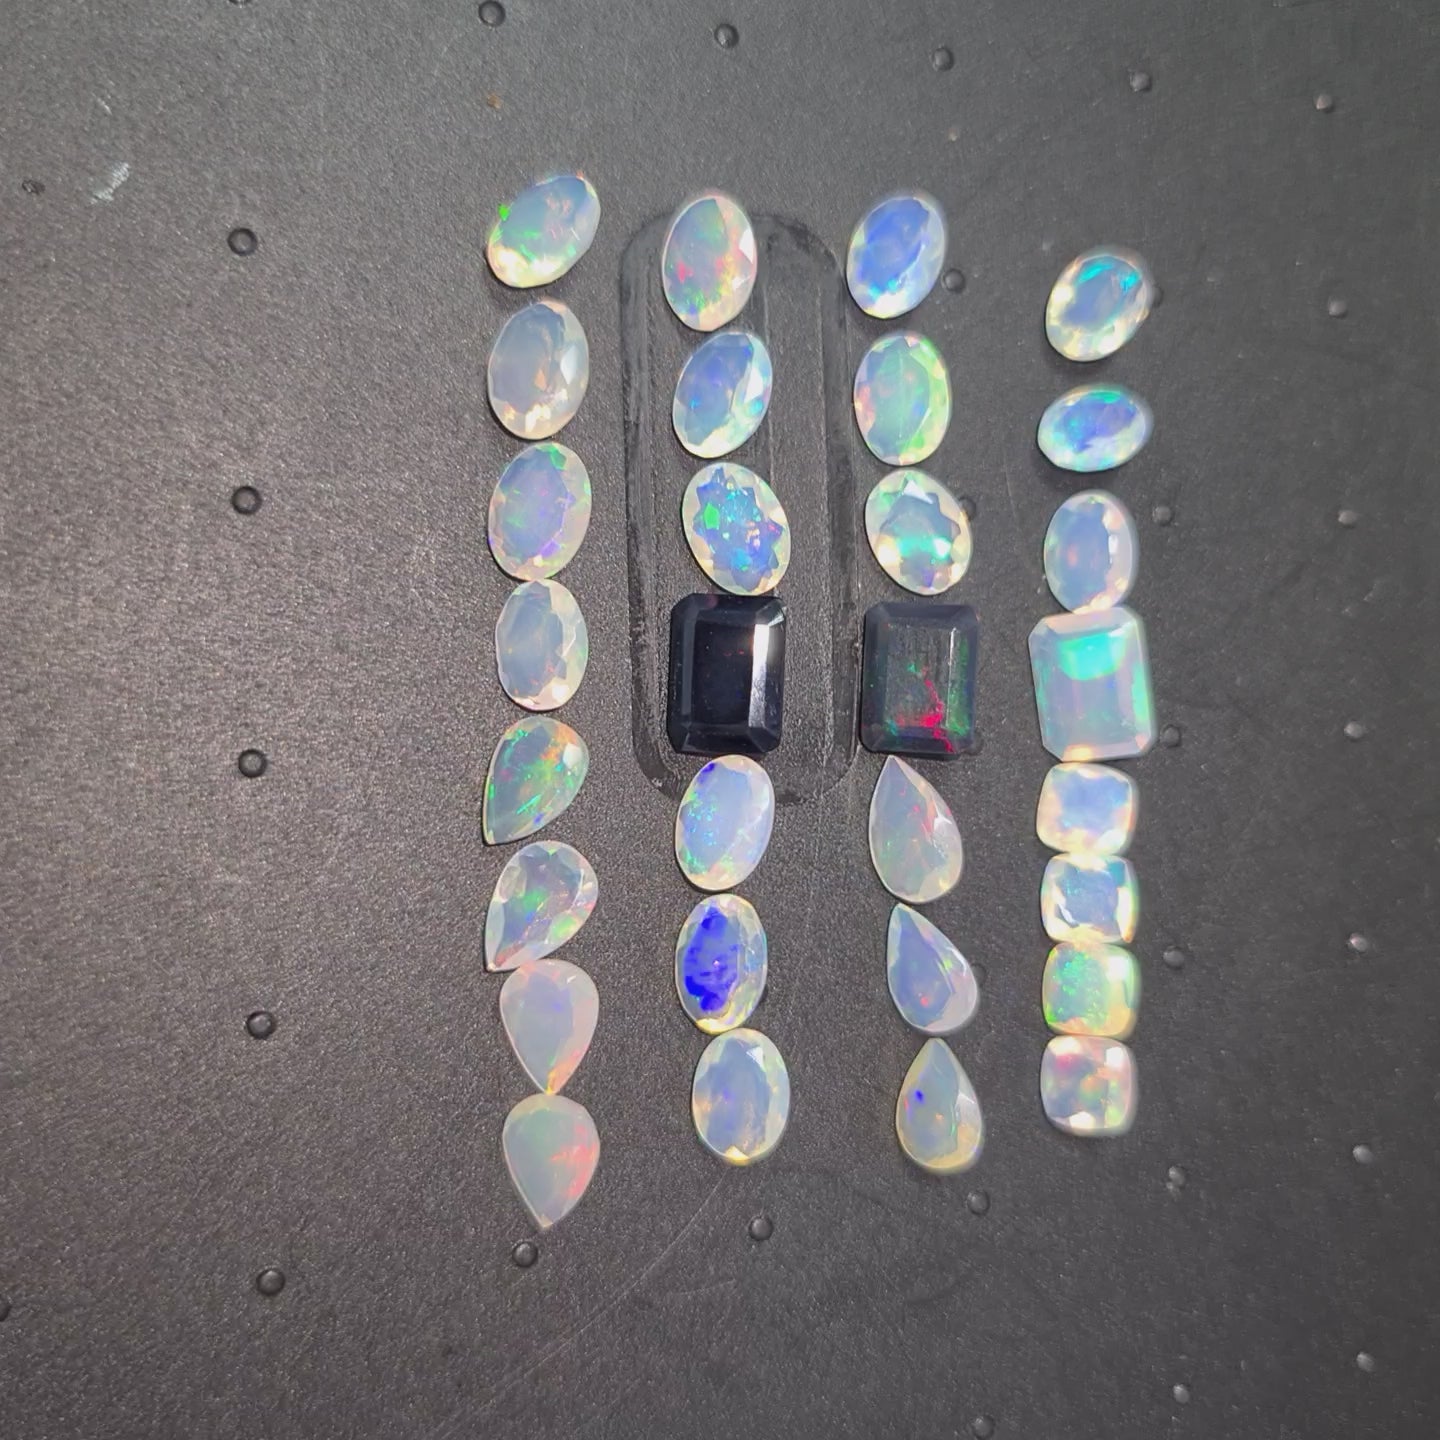 Wholesale Lot: 30 Pcs Natural Opal Faceted 5-8mm | 14Cts Approx. | Ethiopian Mined Untreated